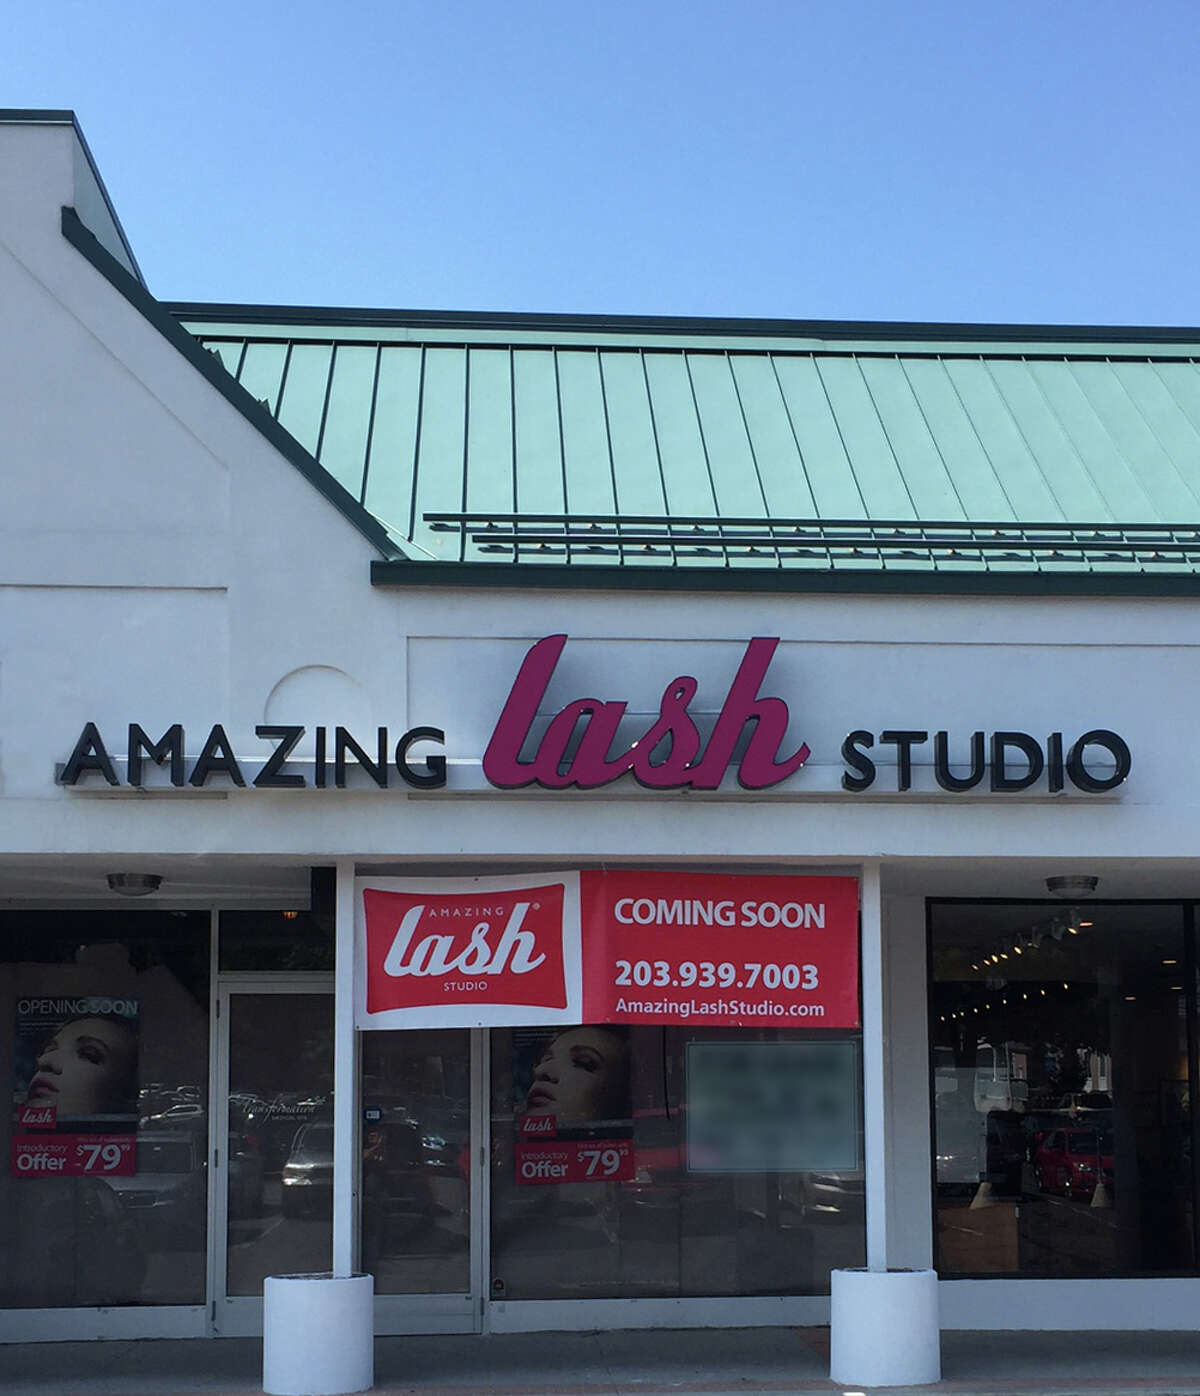 Amazing Lash Studio located at 2193 Black Rock Turnpike in Fairfield will be opening its doors sometime in the month of September.